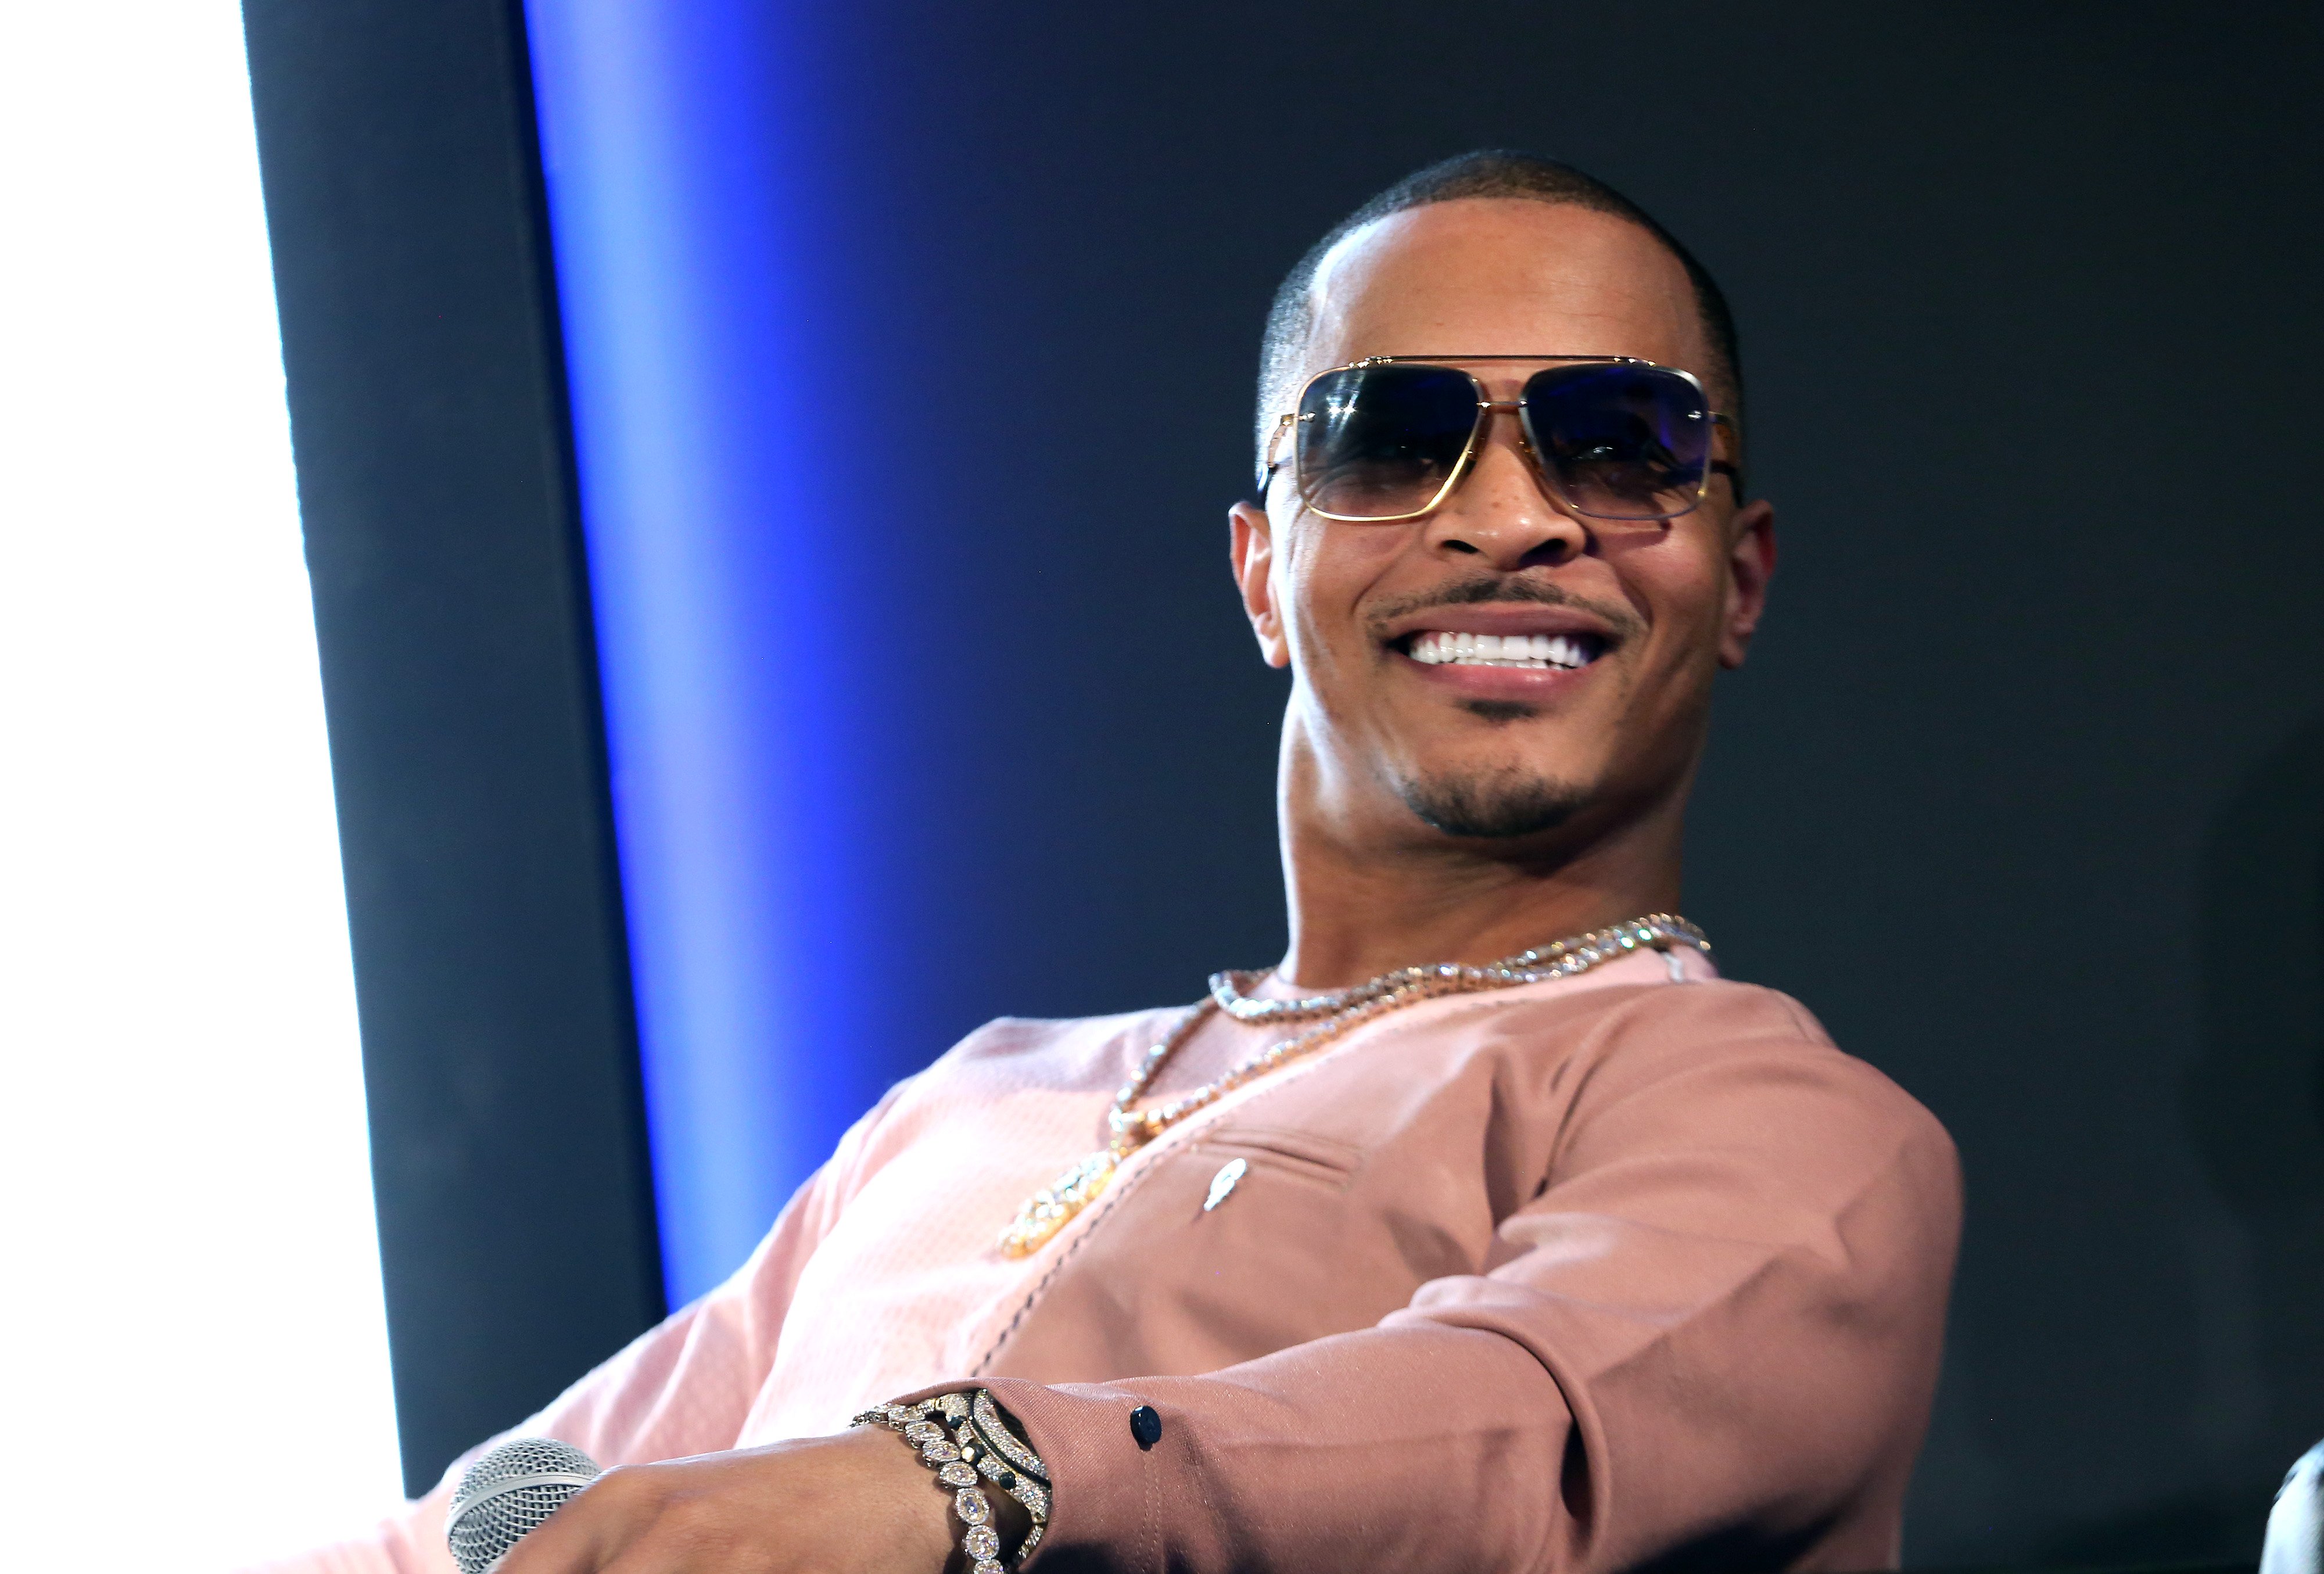  T.I. speaking at META – Convened by BET Networks on February 20, 2020 in Los Angeles, California. | Source: Getty Images